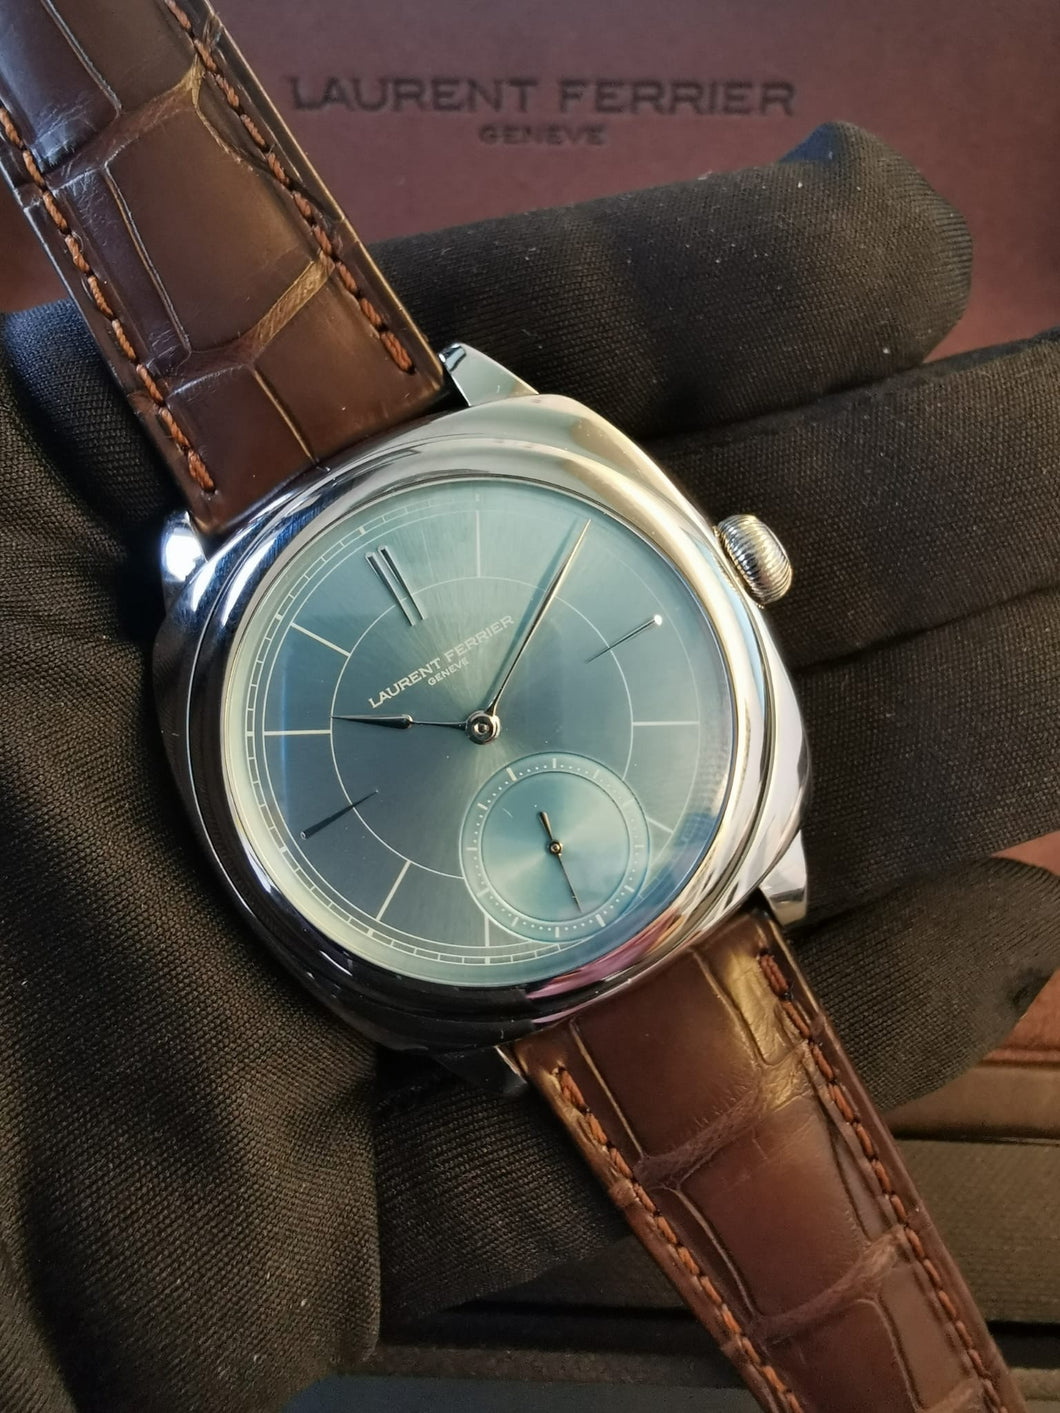 Laurent Ferrier Square Micro-rotor Ice Blue Dial (Rare)